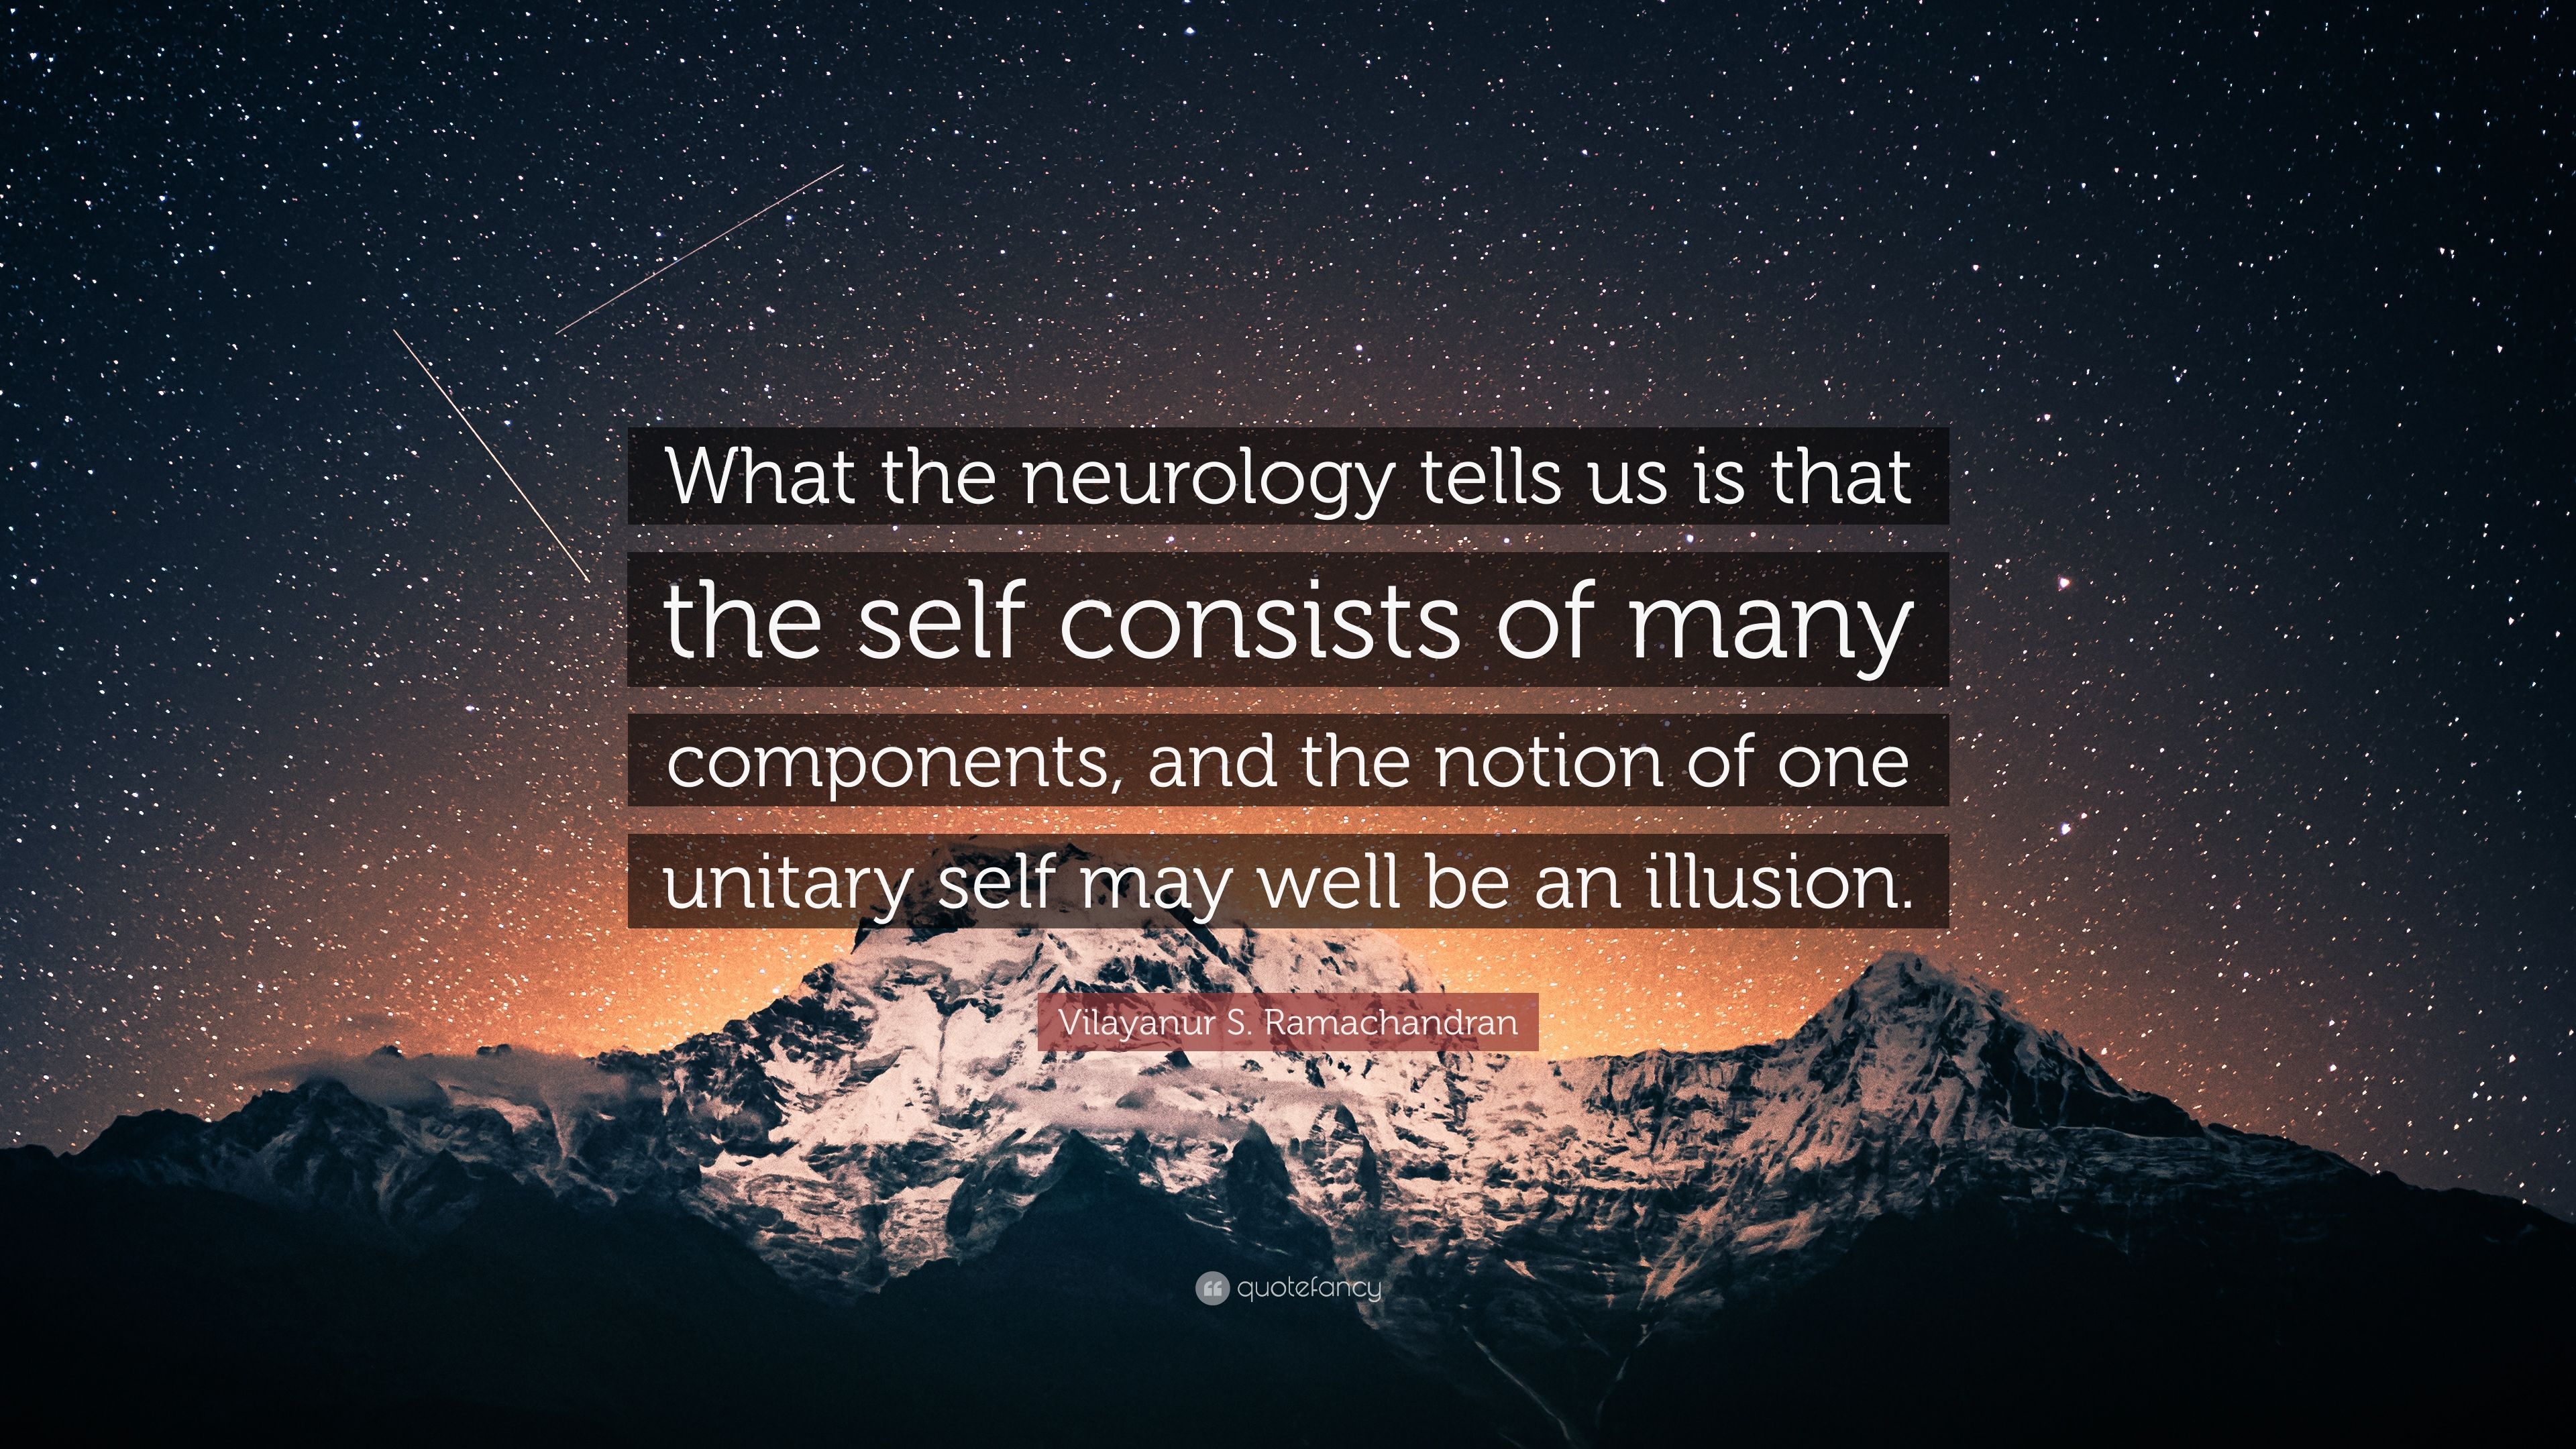 Vilayanur S. Ramachandran Quote: “What the neurology tells us is